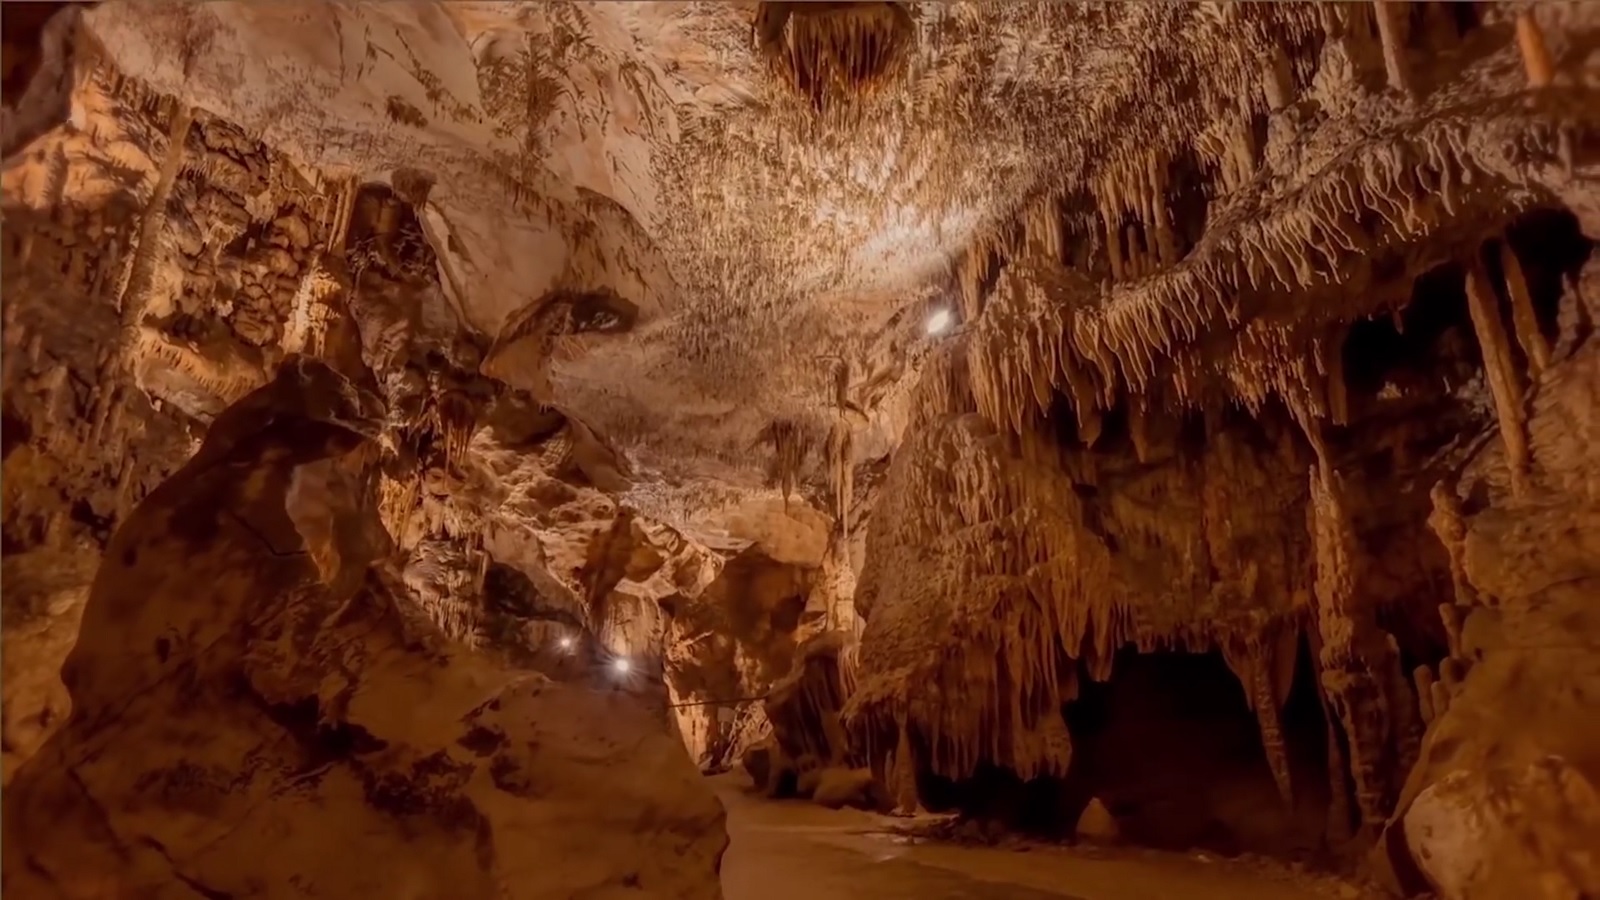 Admire the Subterranean World of Slovakia’s Caves with Underground Periscopes